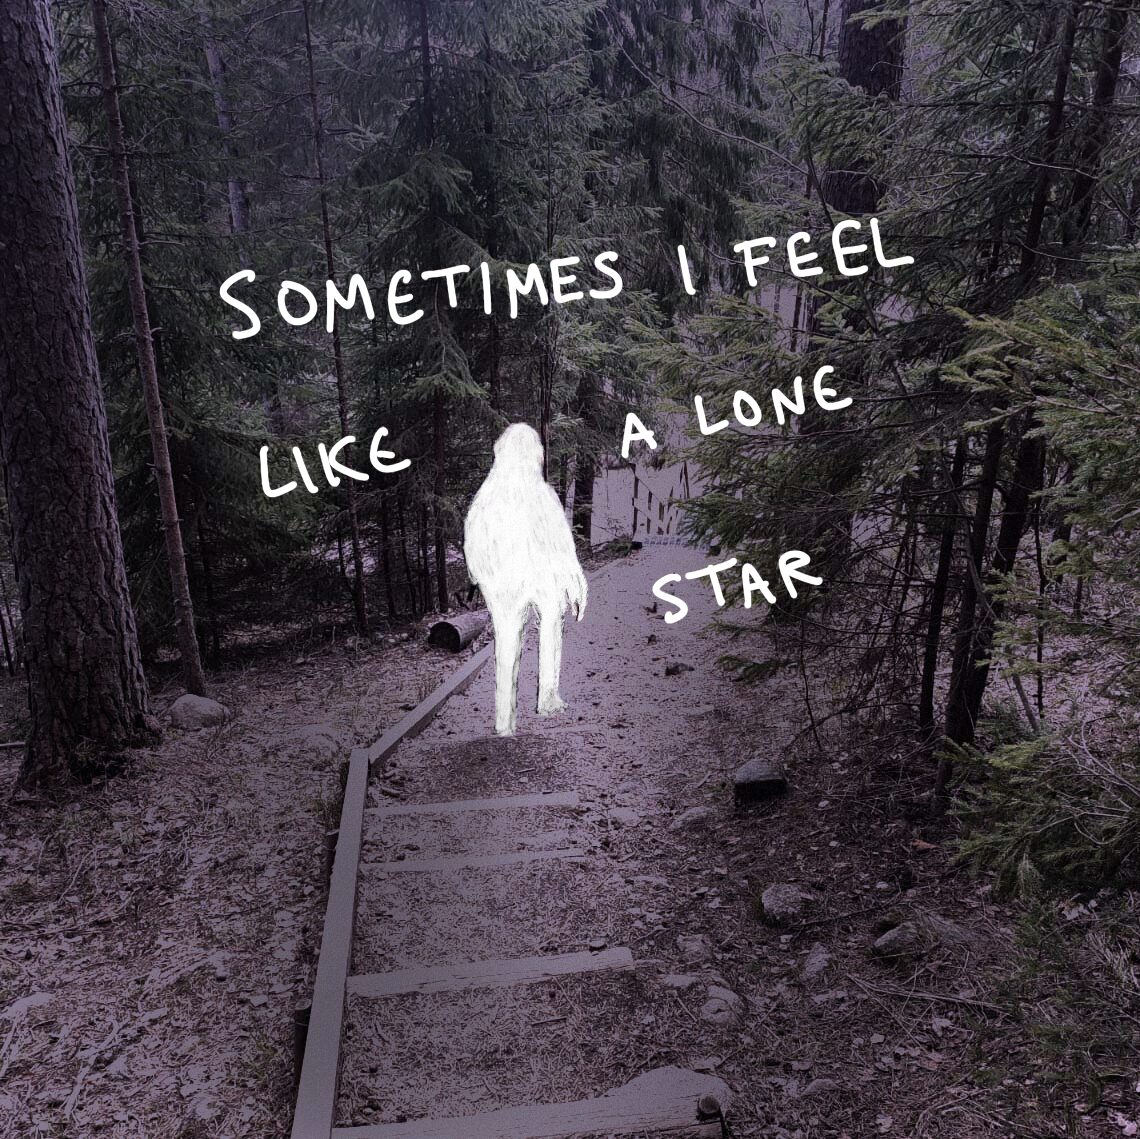 Text on the picture: Sometimes I feel like a lone star.